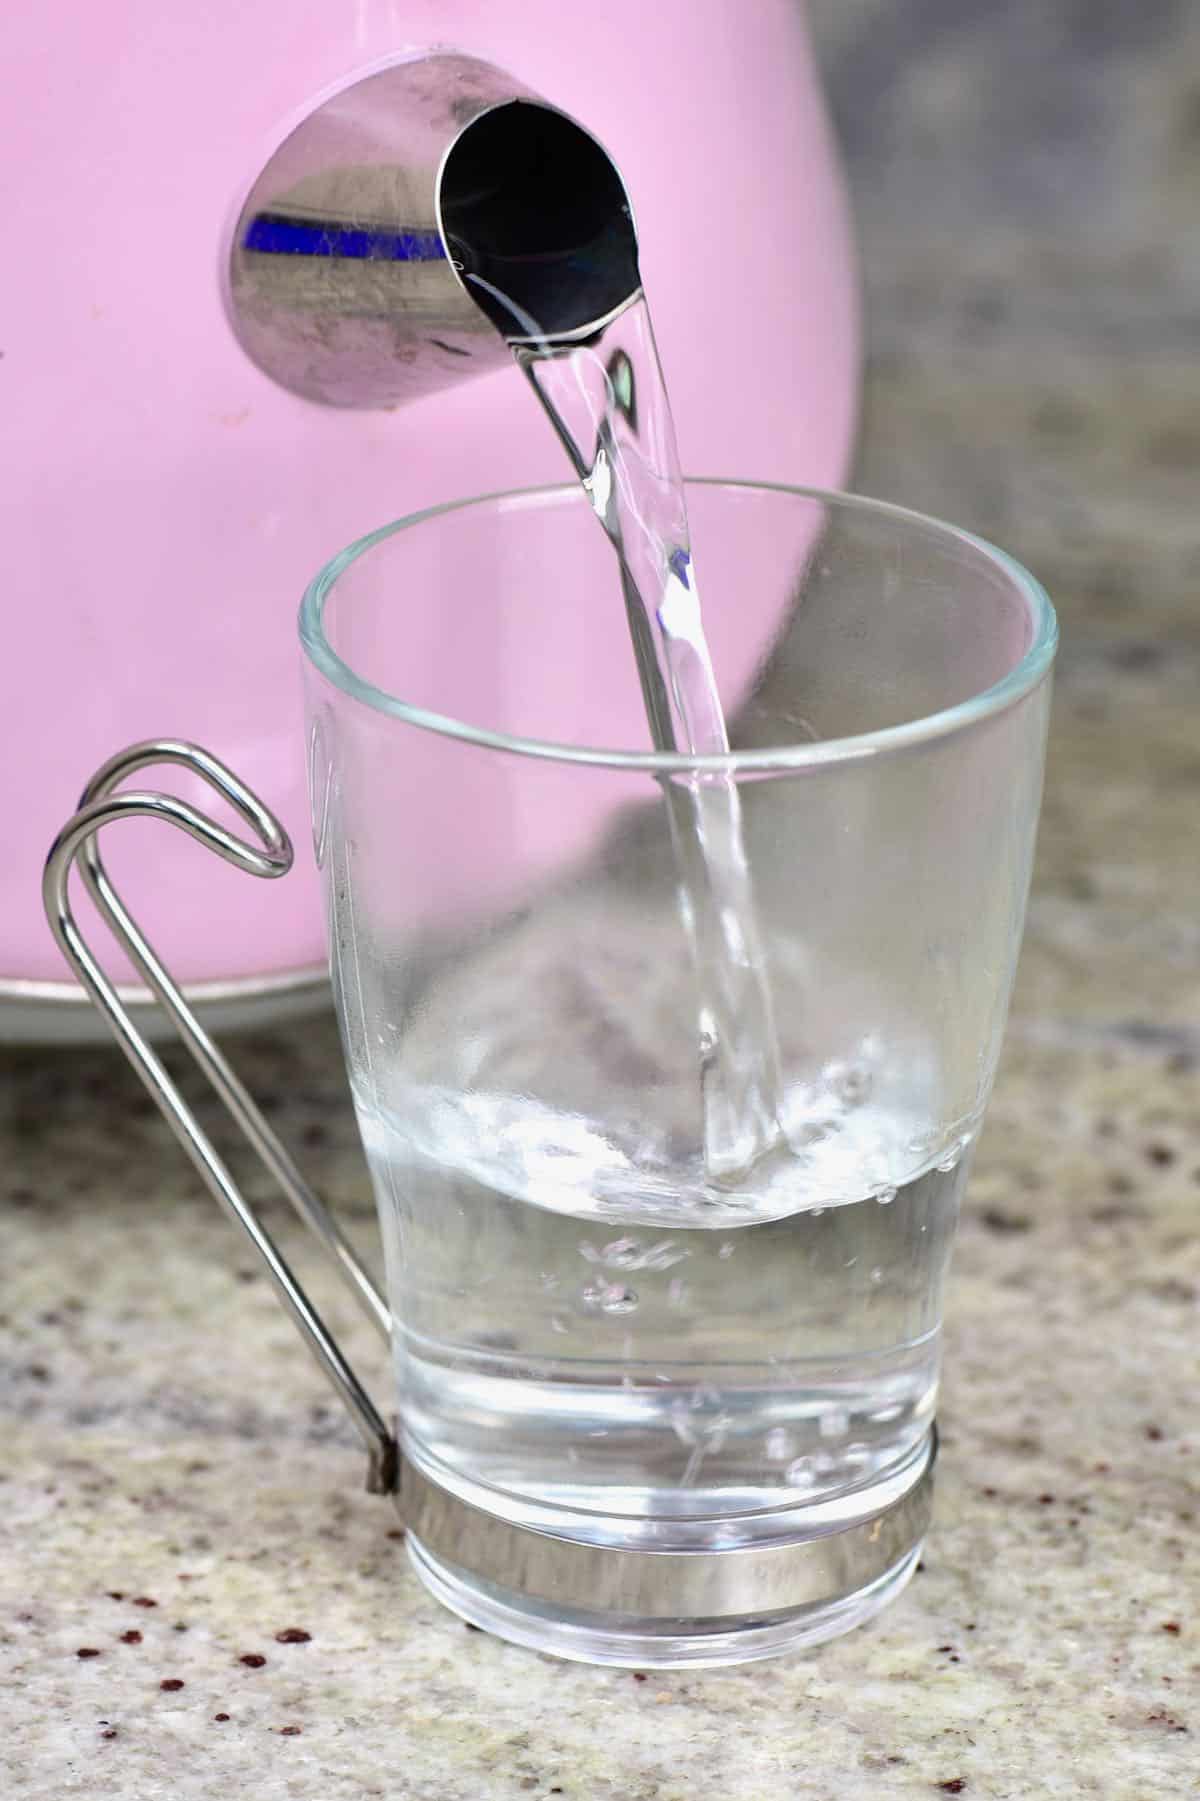 Pouring hot water from kettle to glass